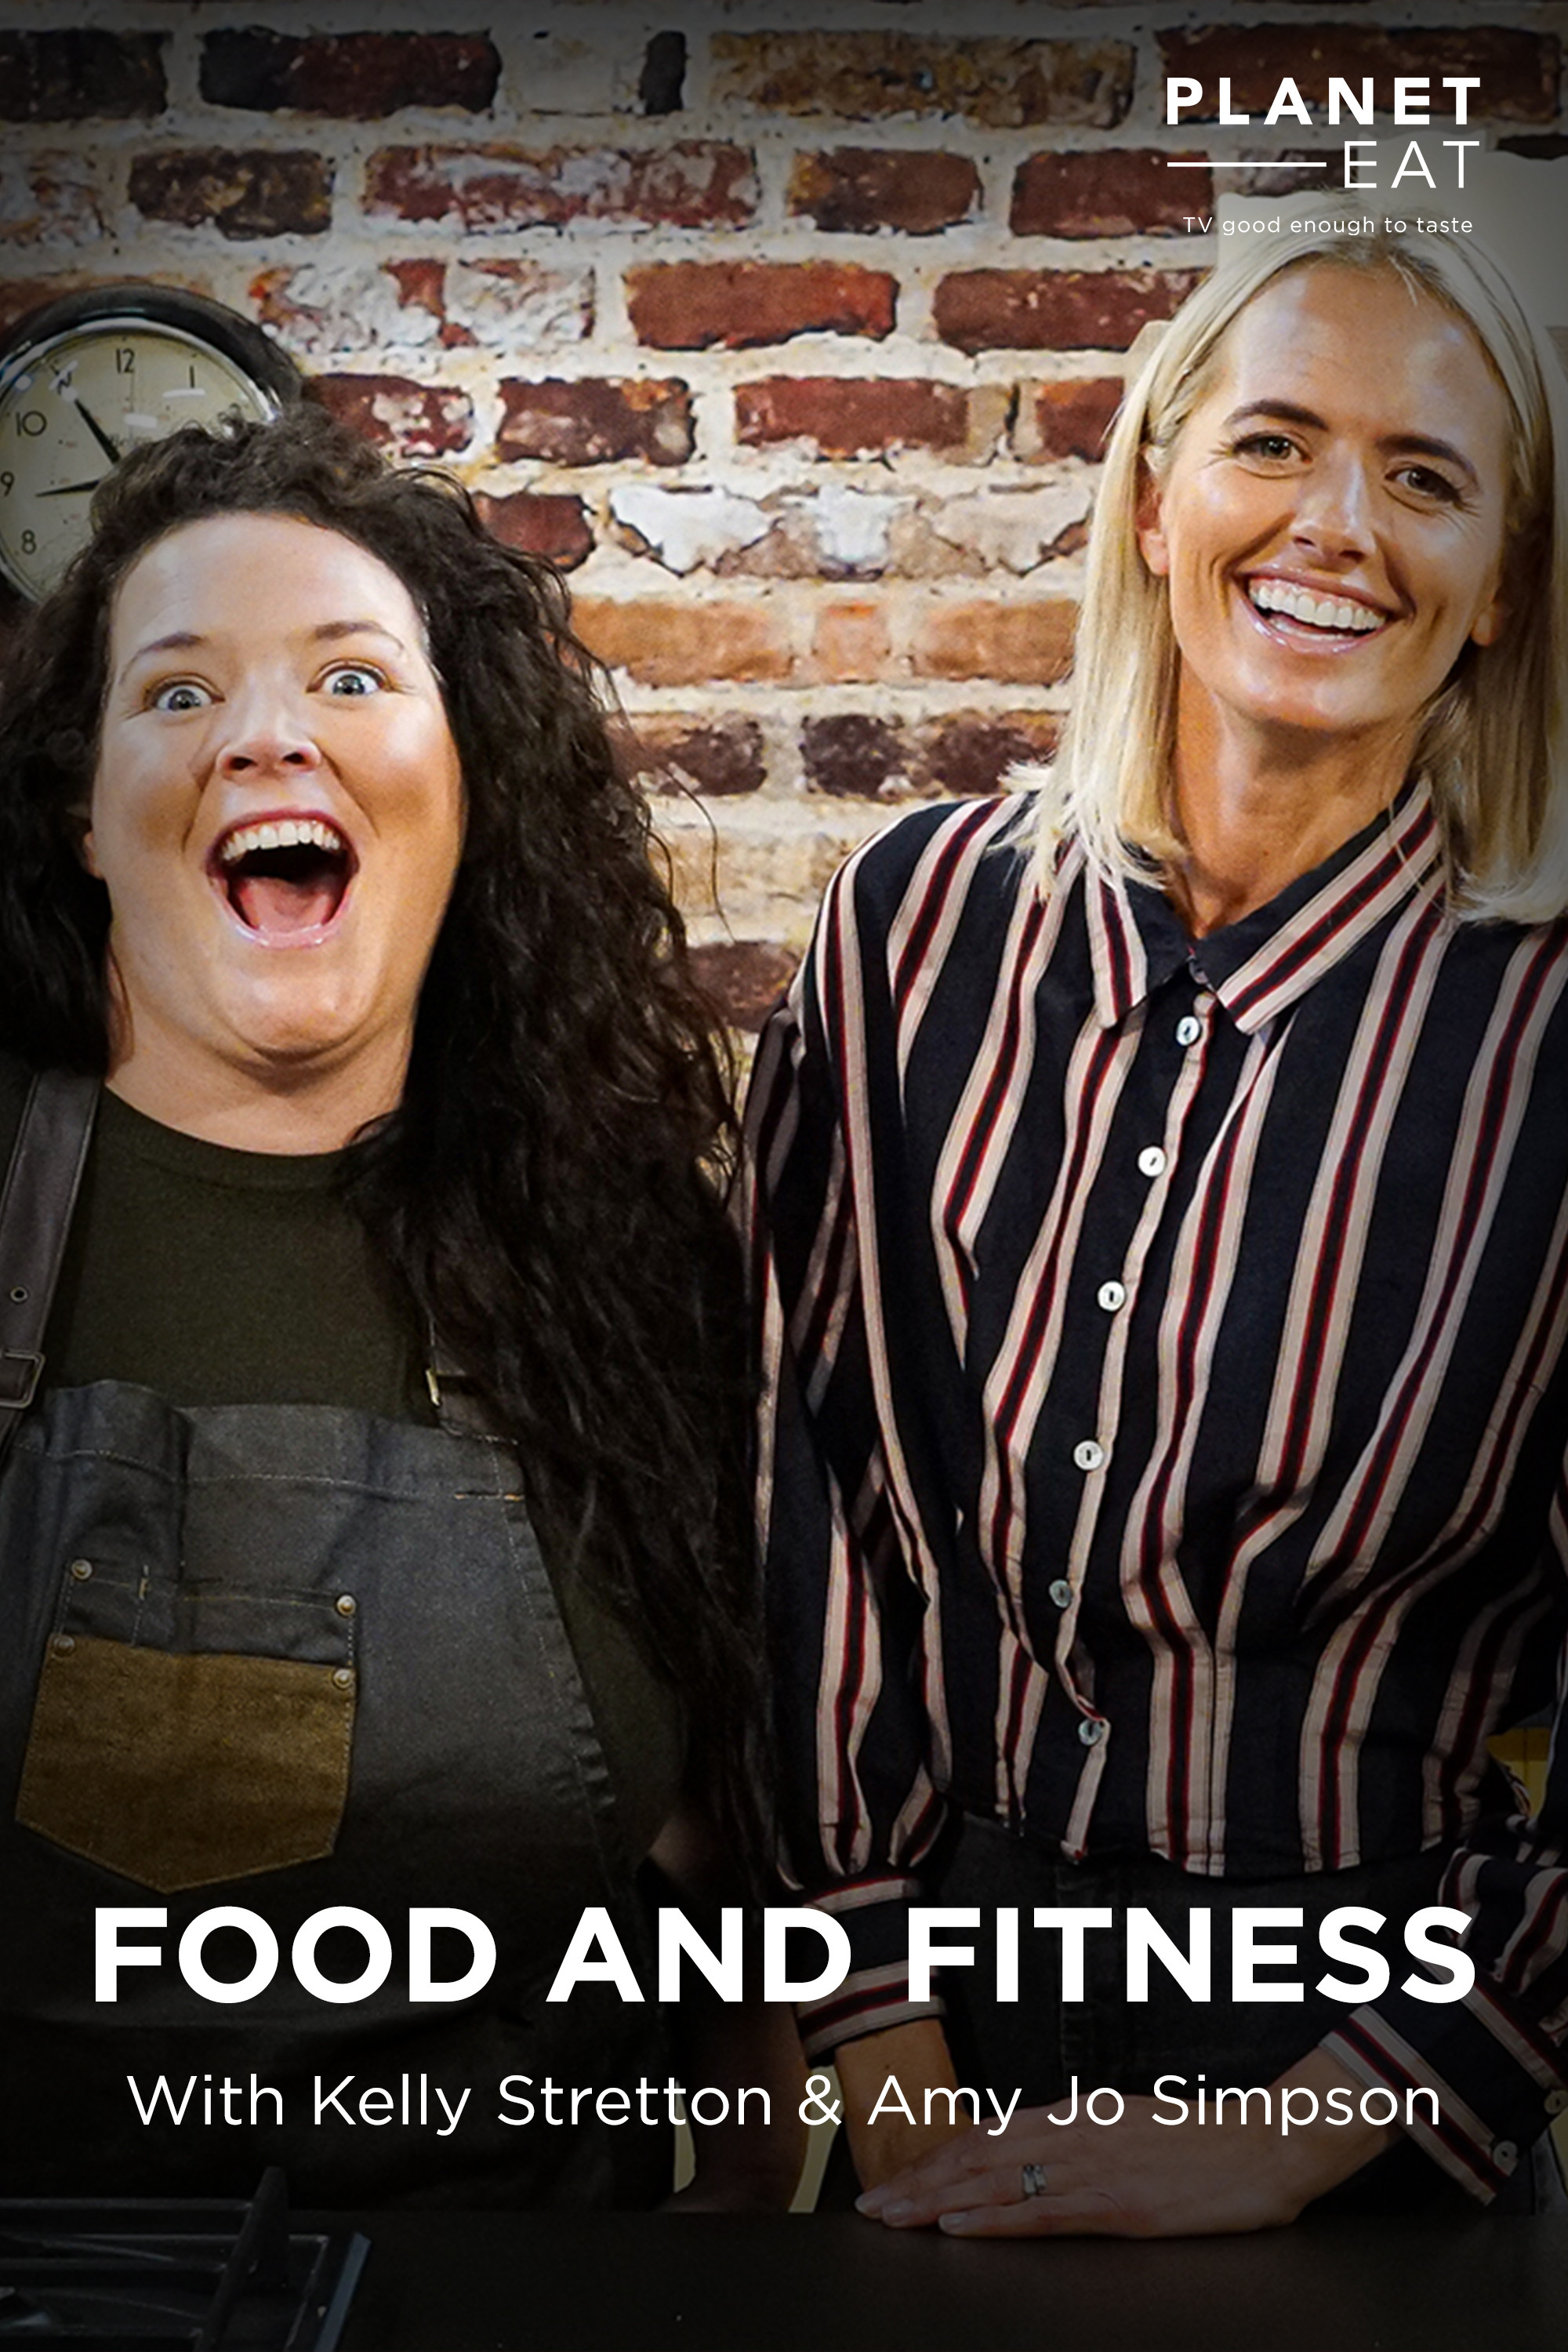 Food and Fitness (Planet Eat)